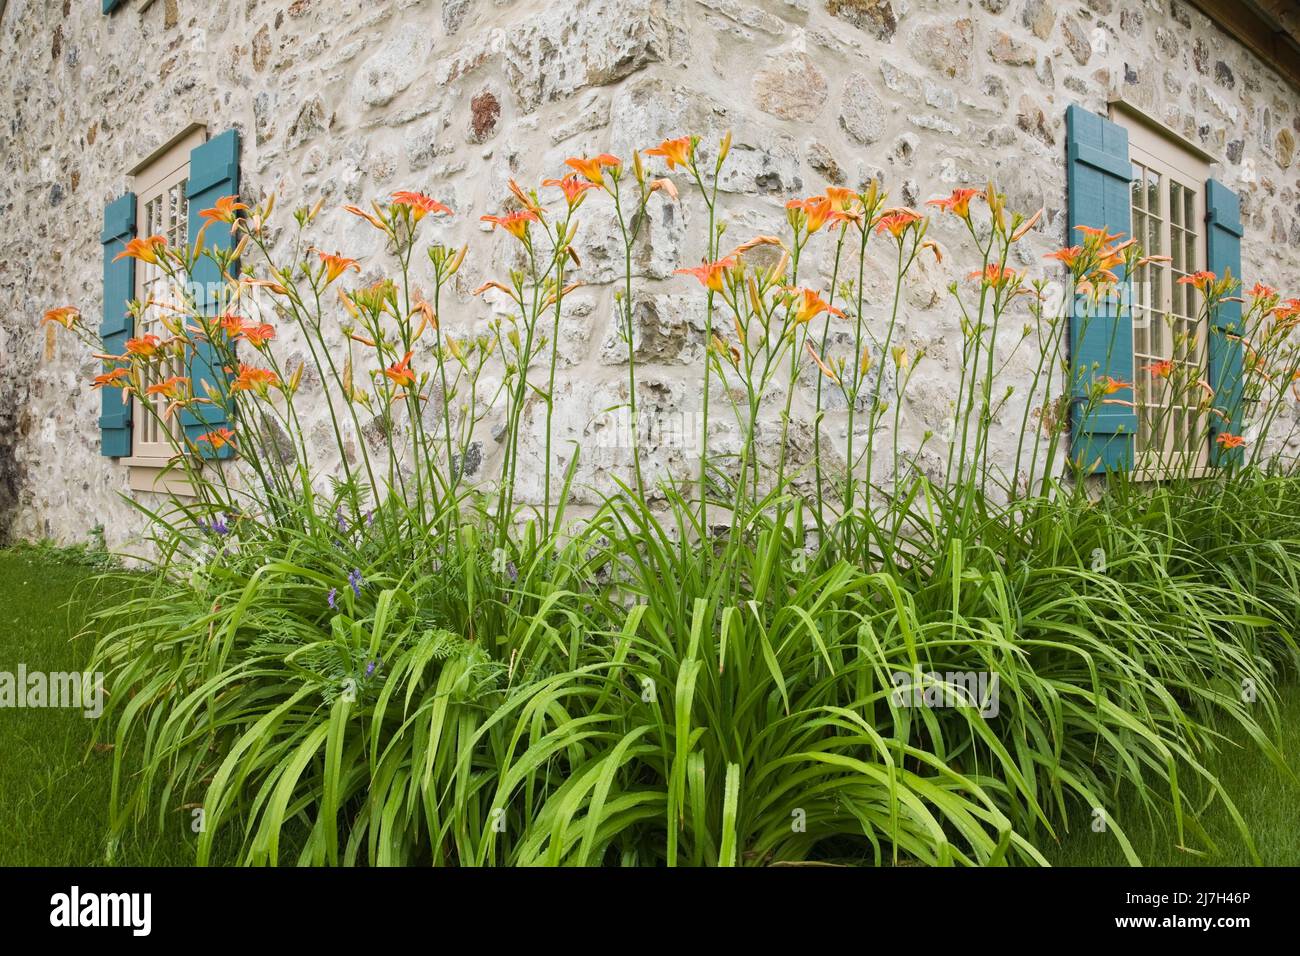 Orange Hemerocallis - Daylilies and tan wood windows with teal blue shutters on old 1722 fieldstone home in summer. Stock Photo